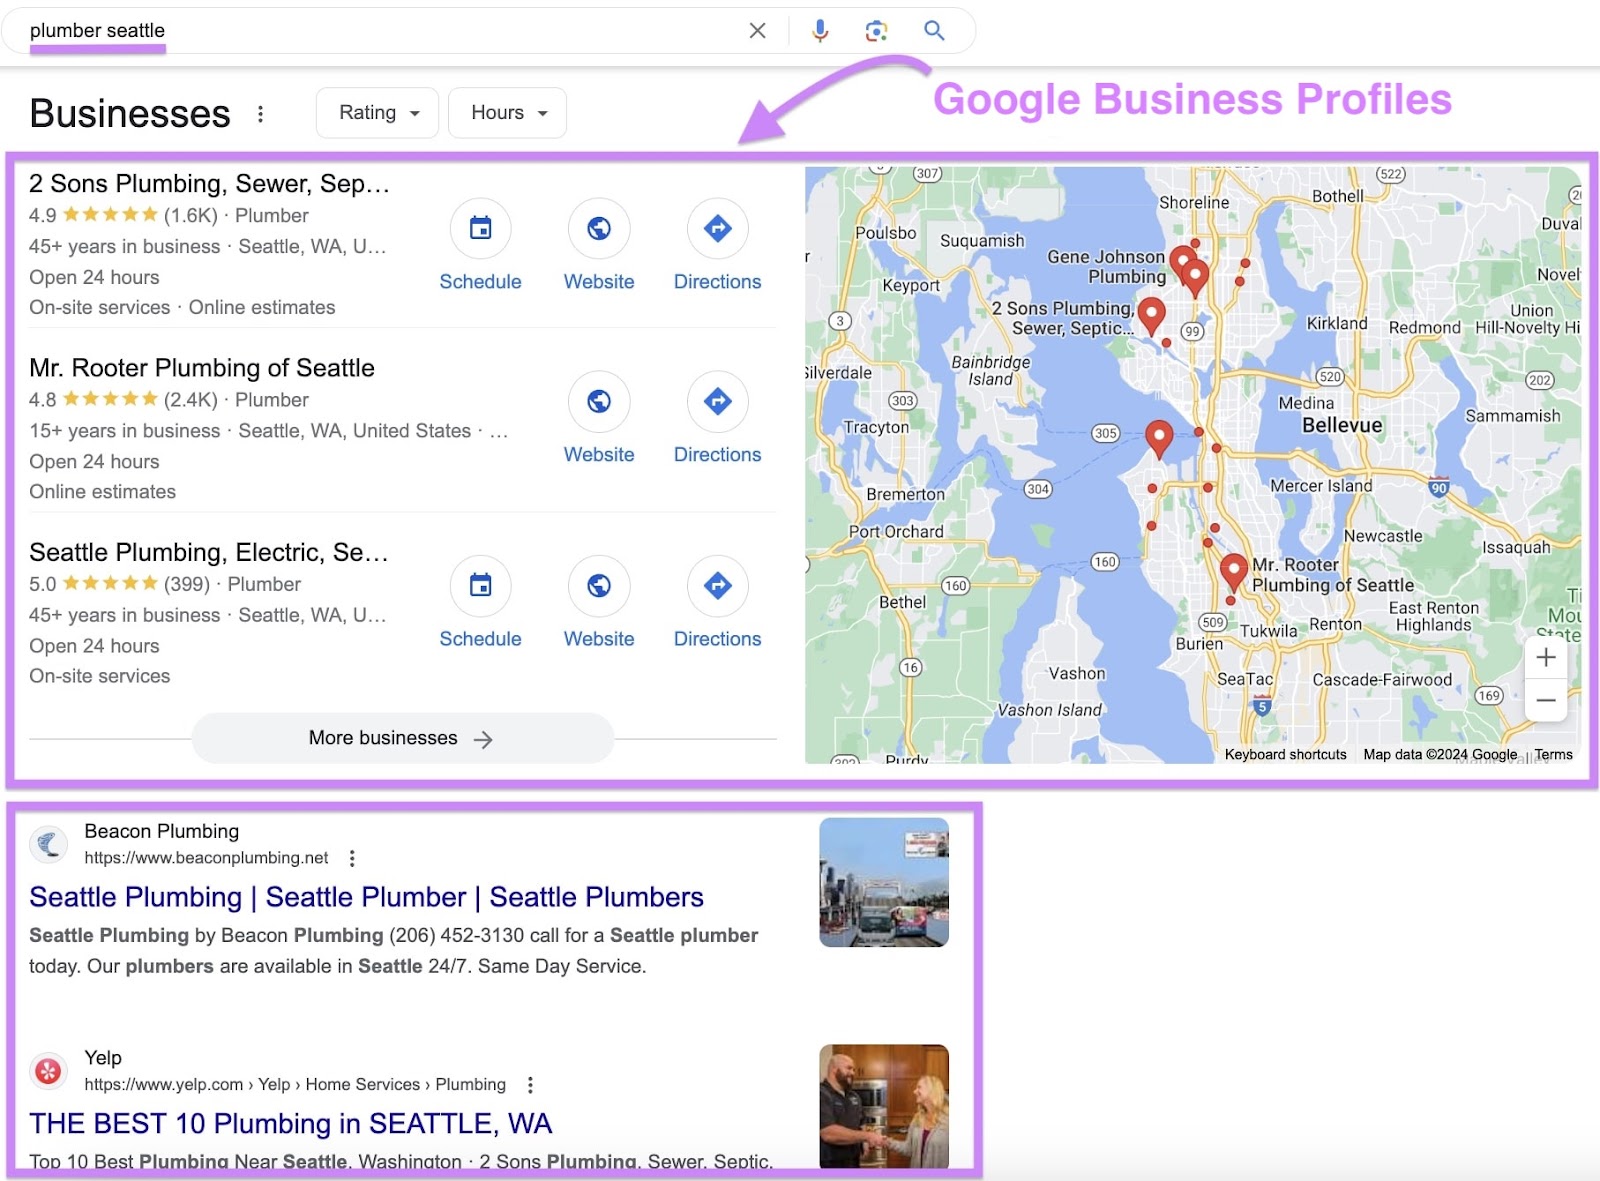 Google search results showing Google Business Profiles in the Local Pack along with two organic search results below.